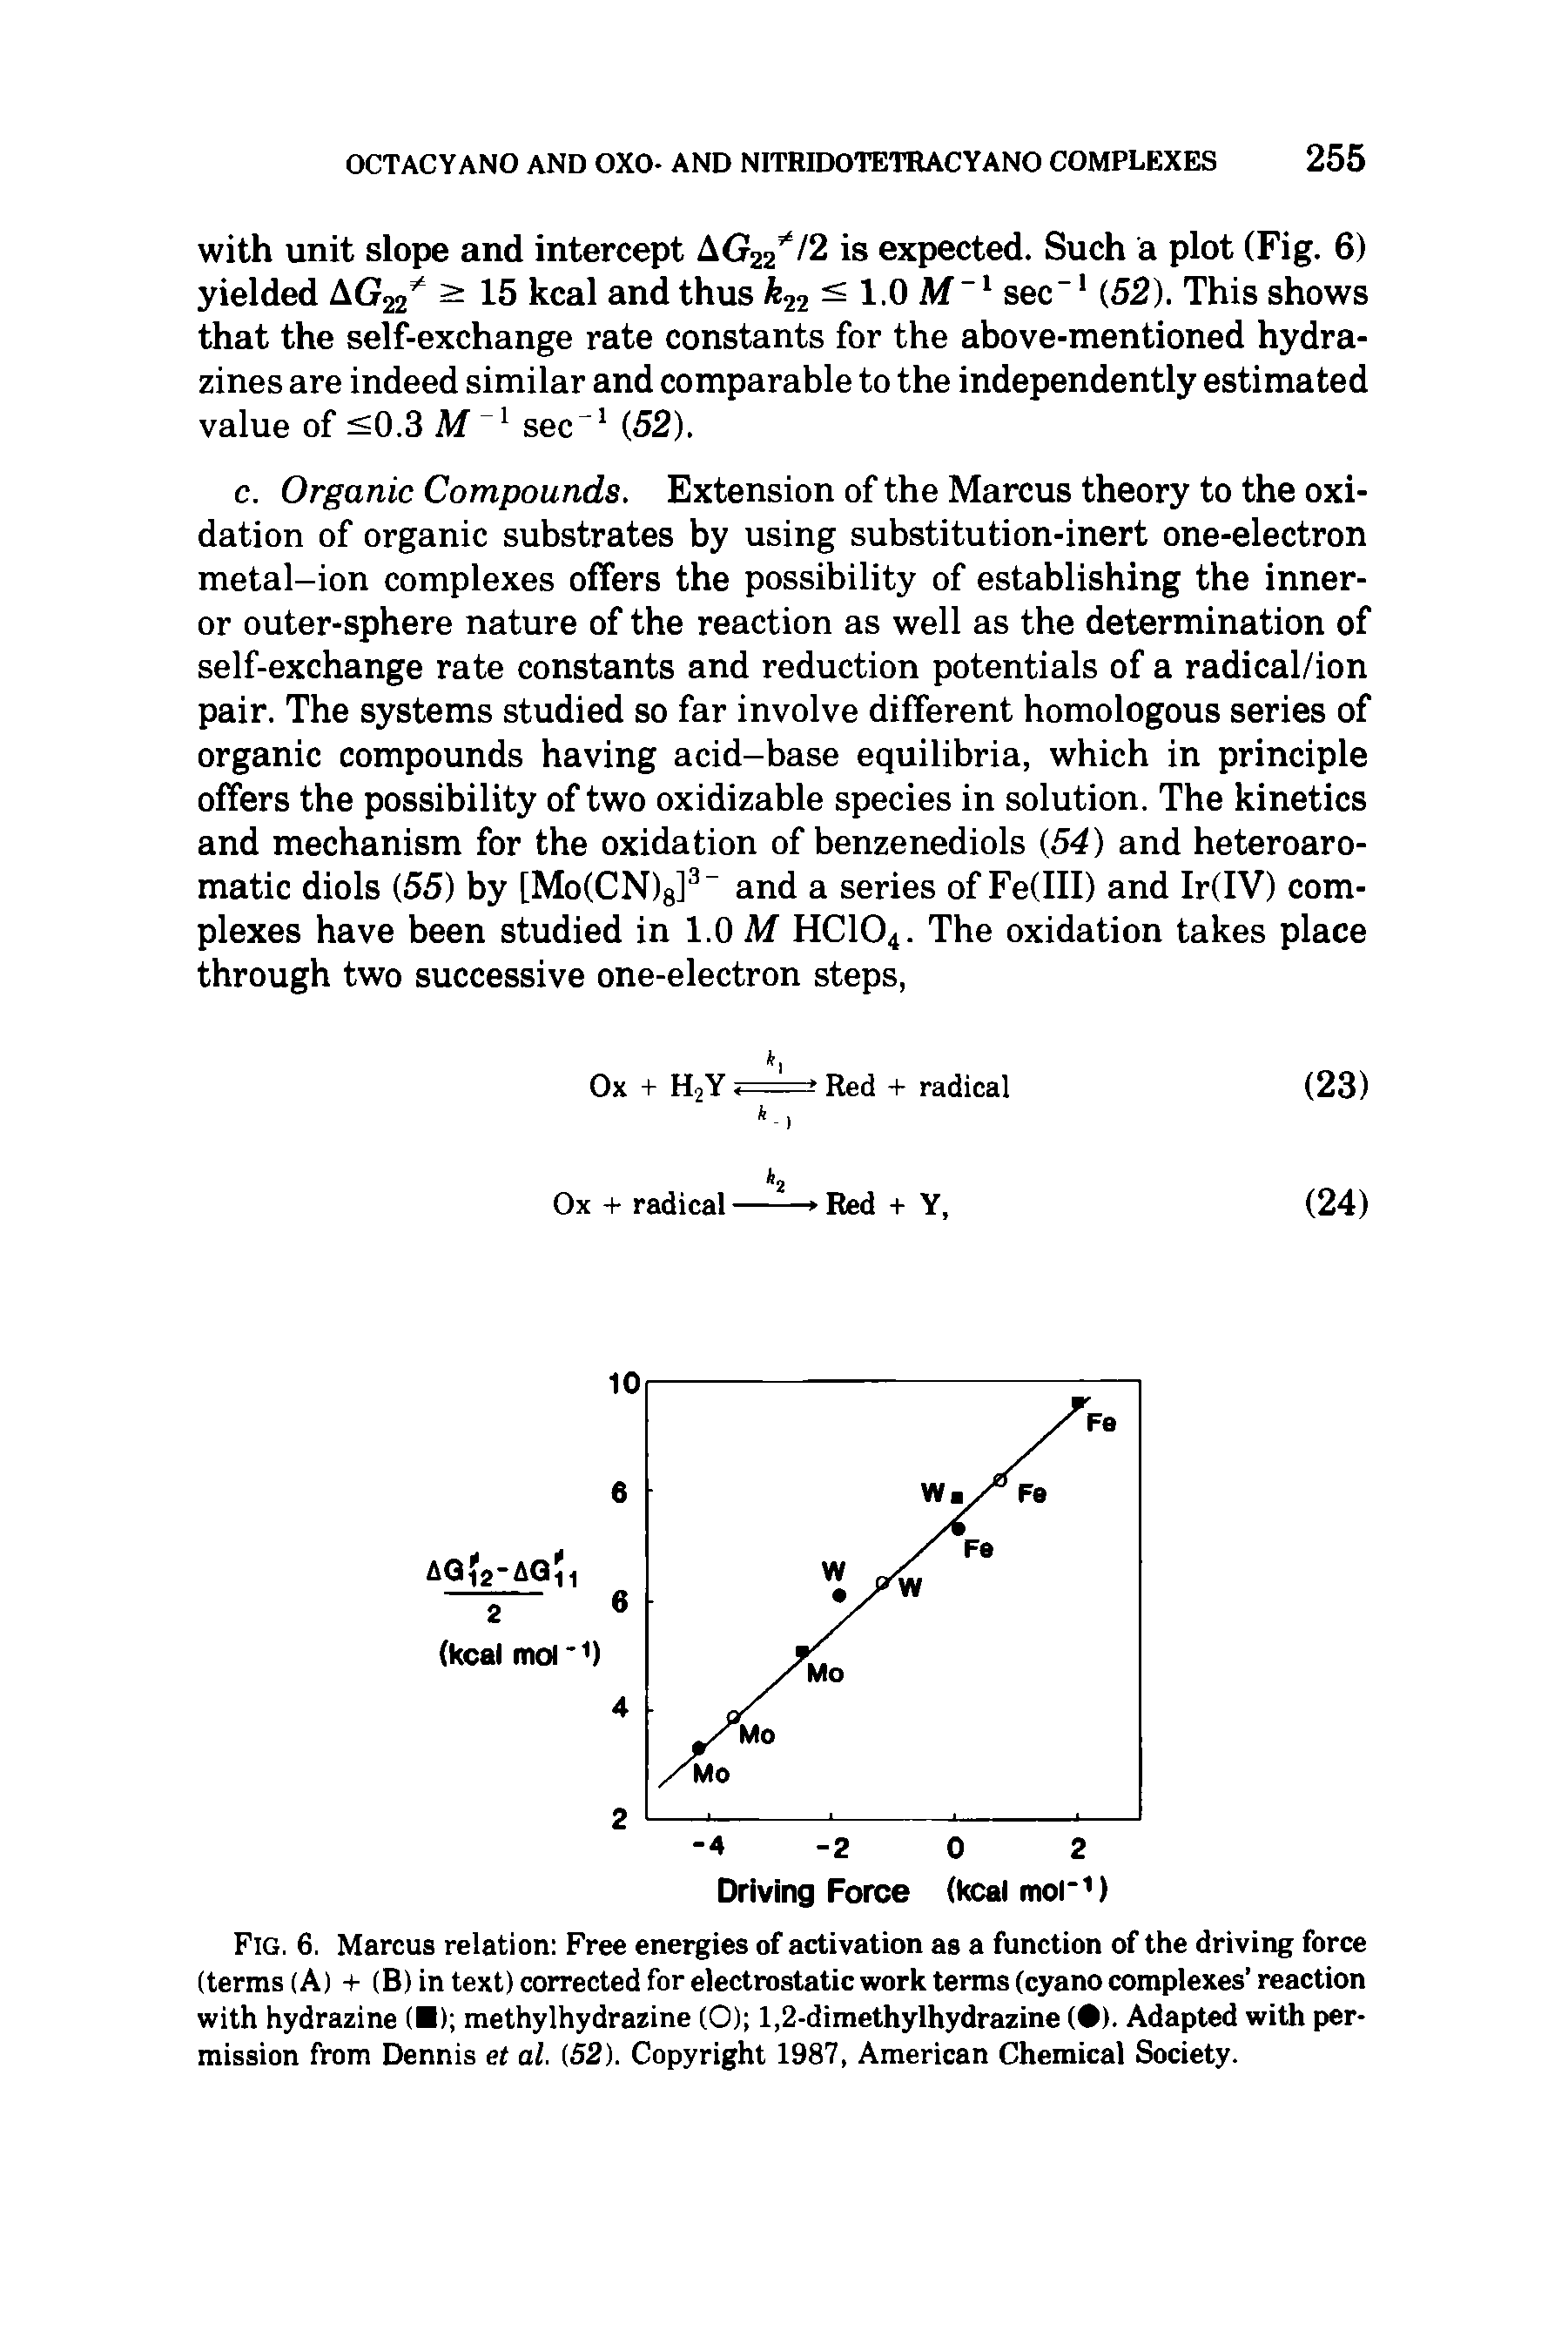 Fig. 6. Marcus relation Free energies of activation as a function of the driving force (terms (A) + (B) in text) corrected for electrostatic work terms (cyano complexes reaction with hydrazine ( ) methylhydrazine (O) 1,2-dimethylhydrazine ( ). Adapted with permission from Dennis et al. (52). Copyright 1987, American Chemical Society.